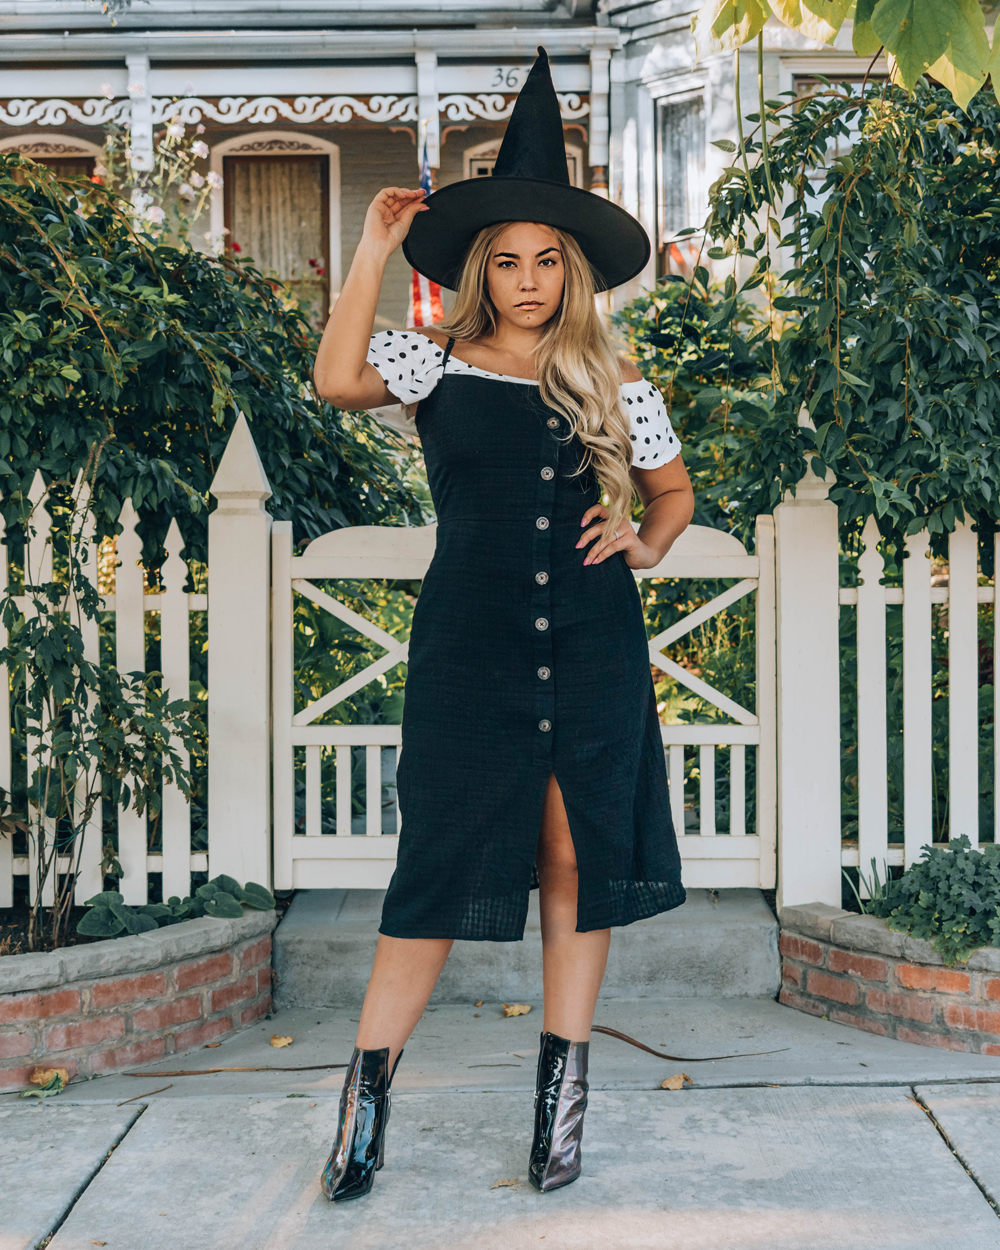 DIY witch costume using a LBD